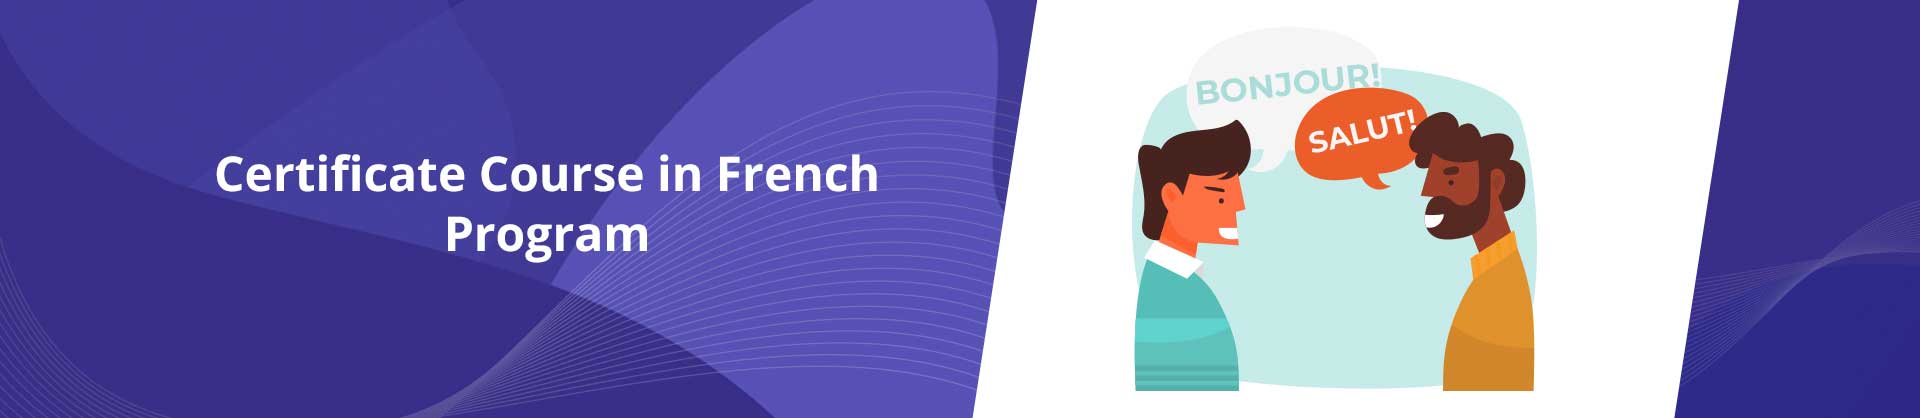 Certificate course in French